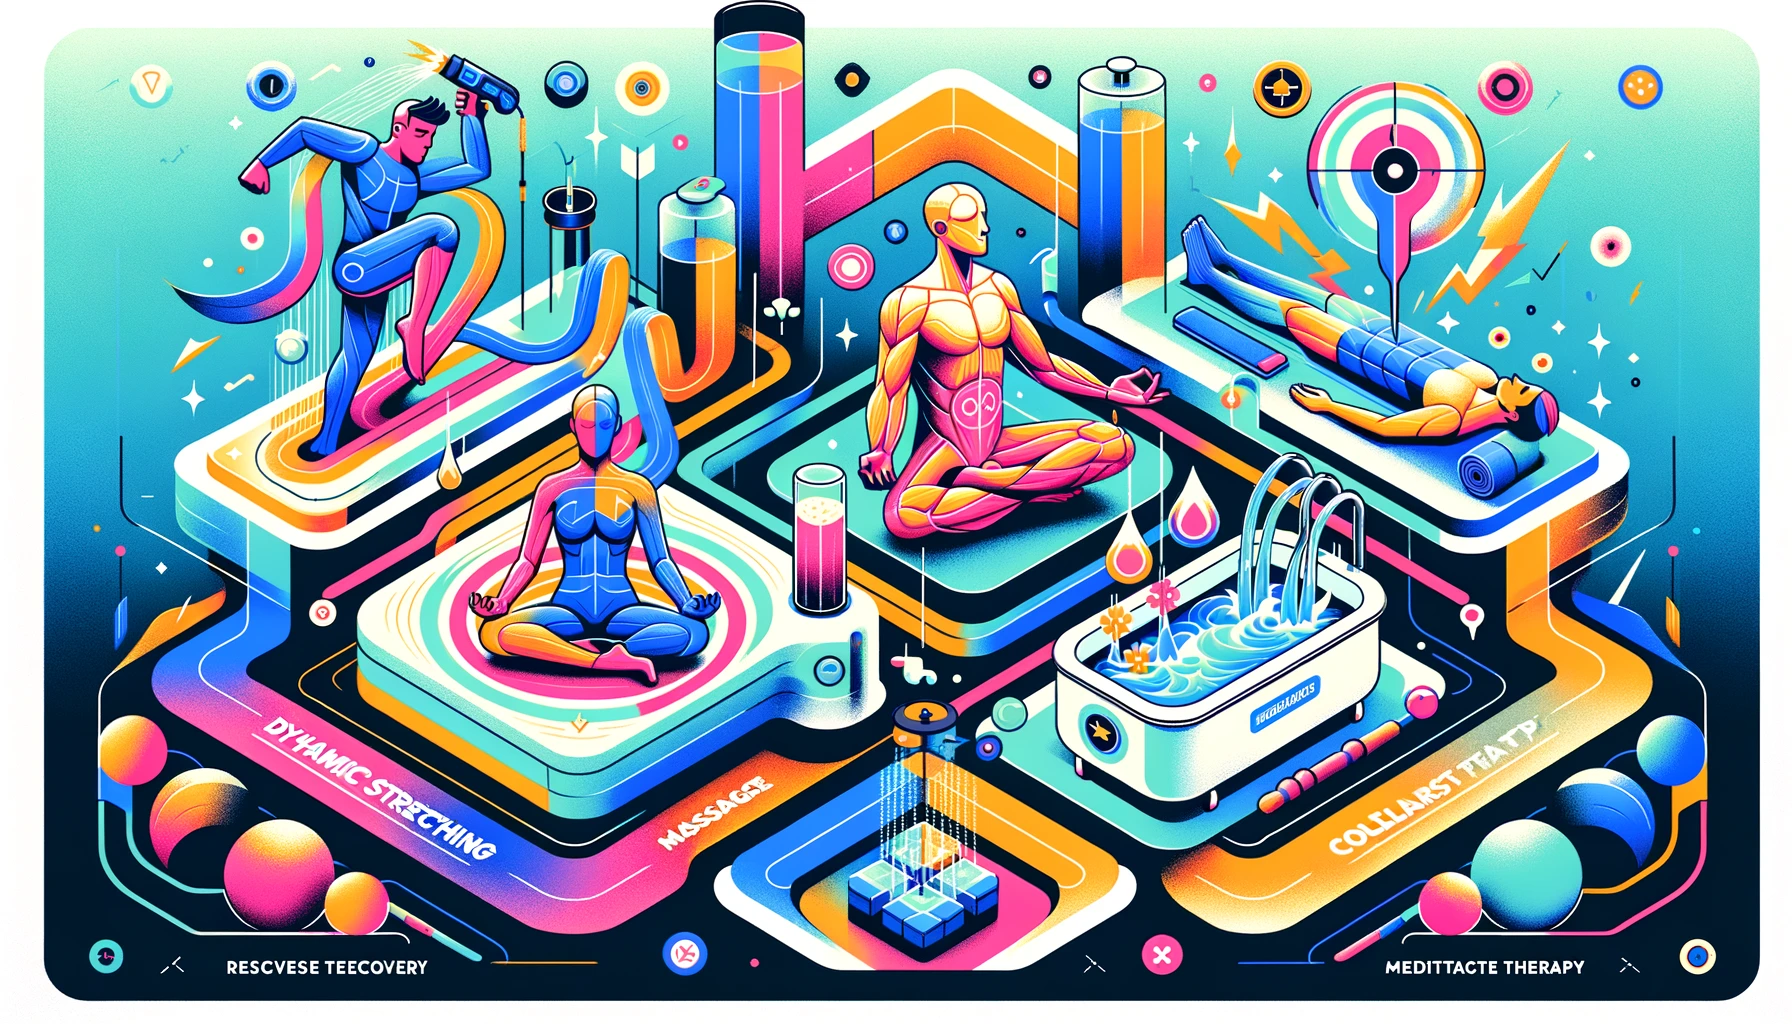 Illustrative depiction of various exercise recovery techniques, including dynamic stretching, massage, meditation therapy, and more in a futuristic setting.